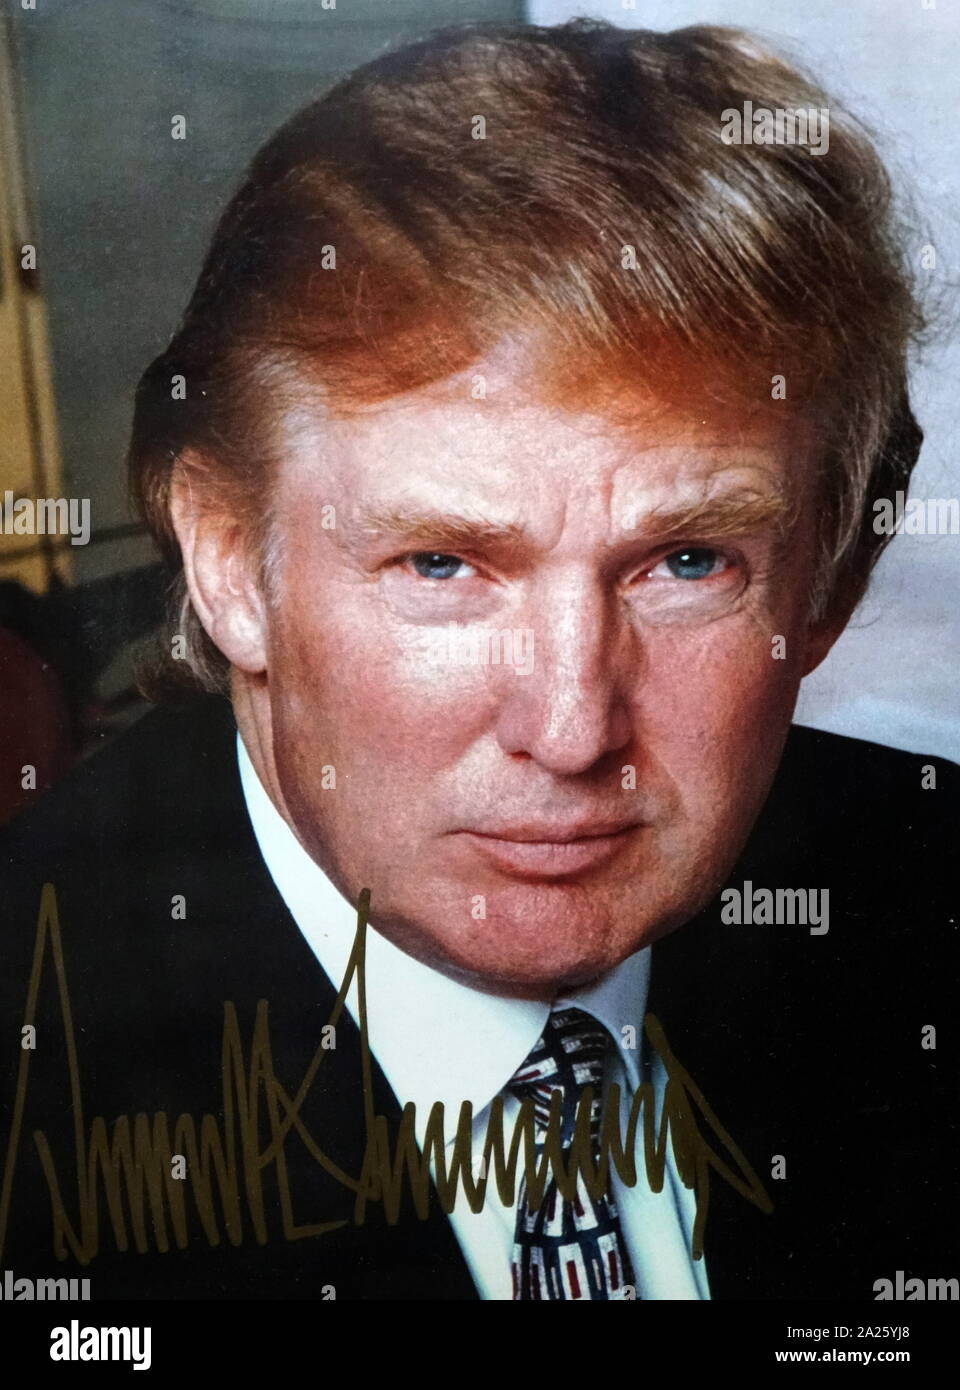 An autographed picture of Donald Trump. Donald John Trump (1946-) an American politician, businessman, television personality and 45th President of the United States of America. Stock Photo